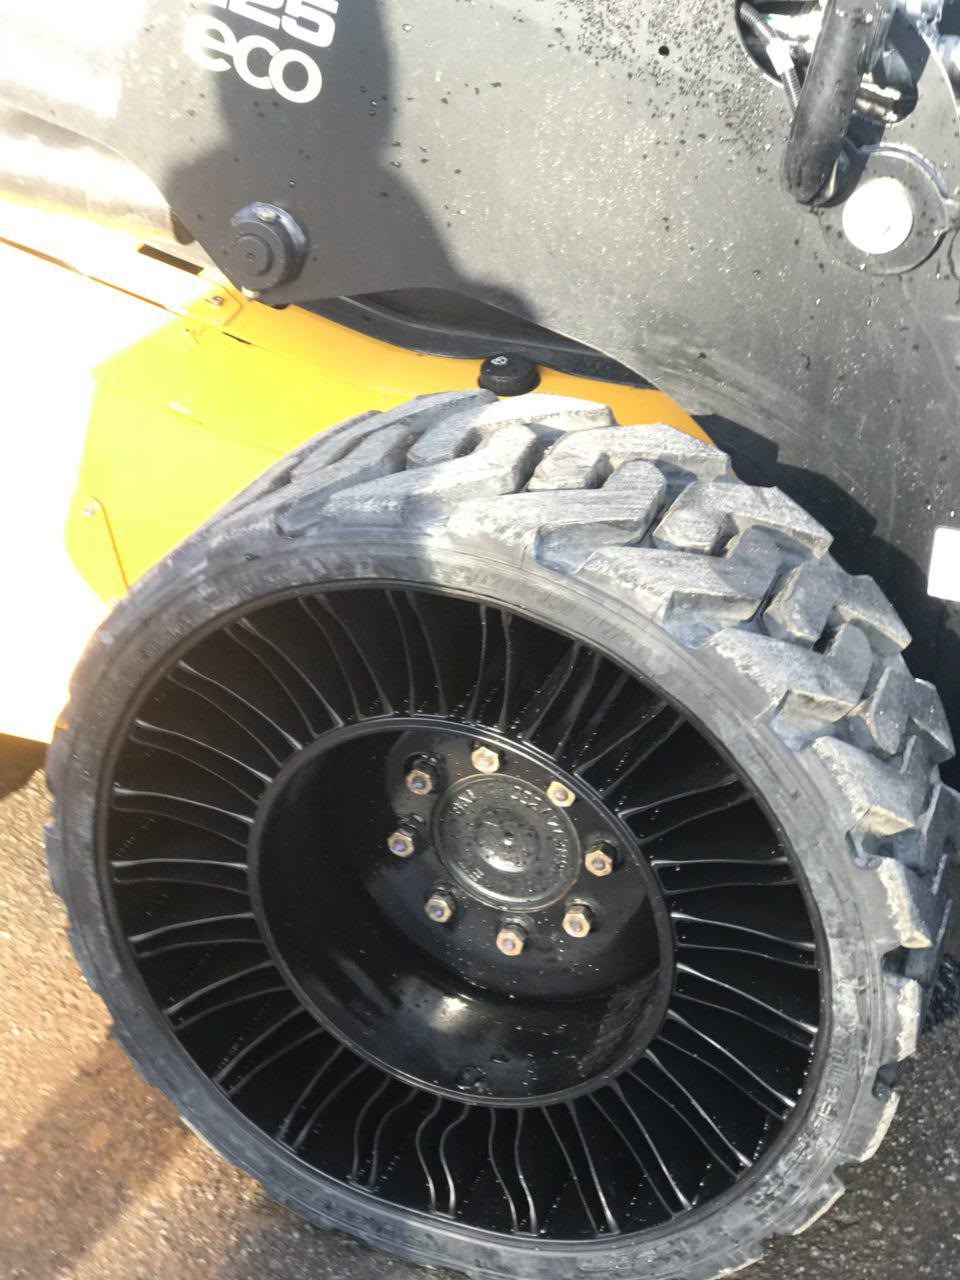 On the Russian market are new airless Tires Michelin although its a whole Wheel